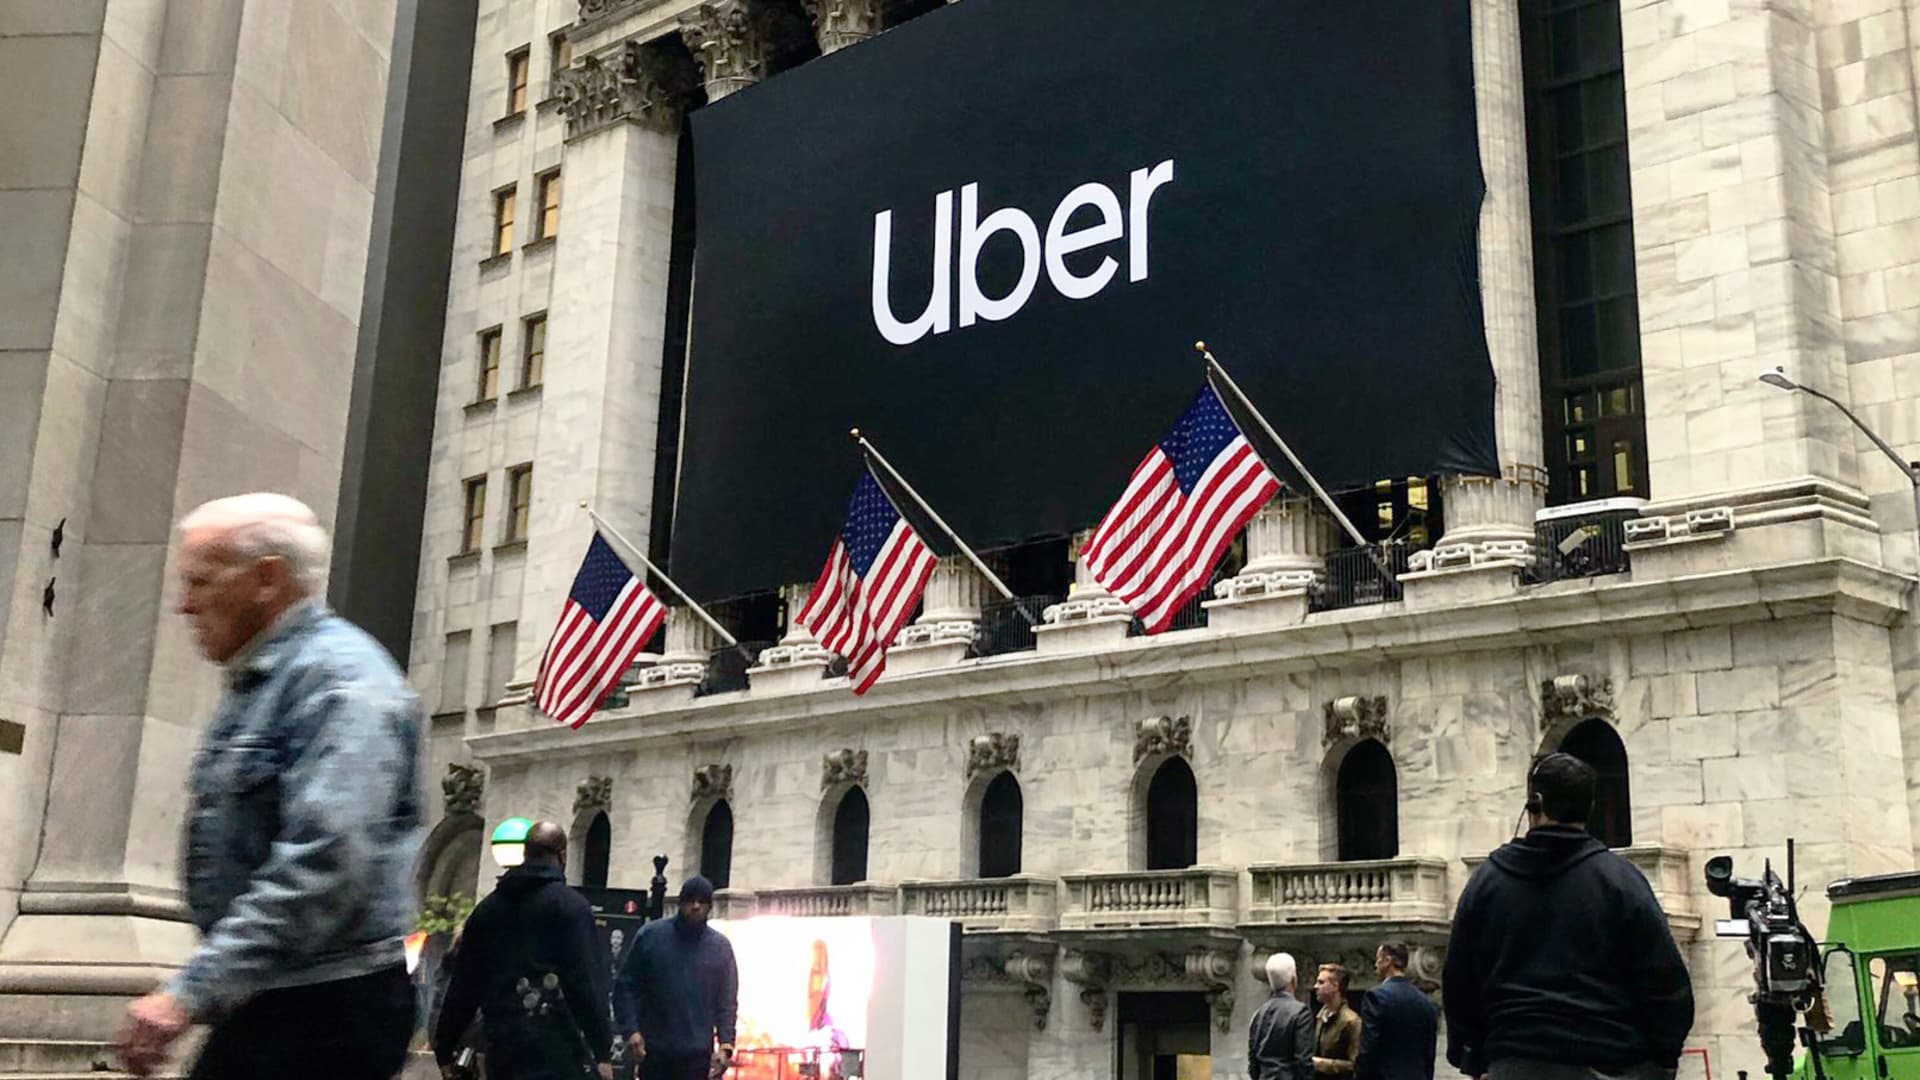 Stocks making the biggest moves midday: Uber, Pinterest, Caterpillar and more